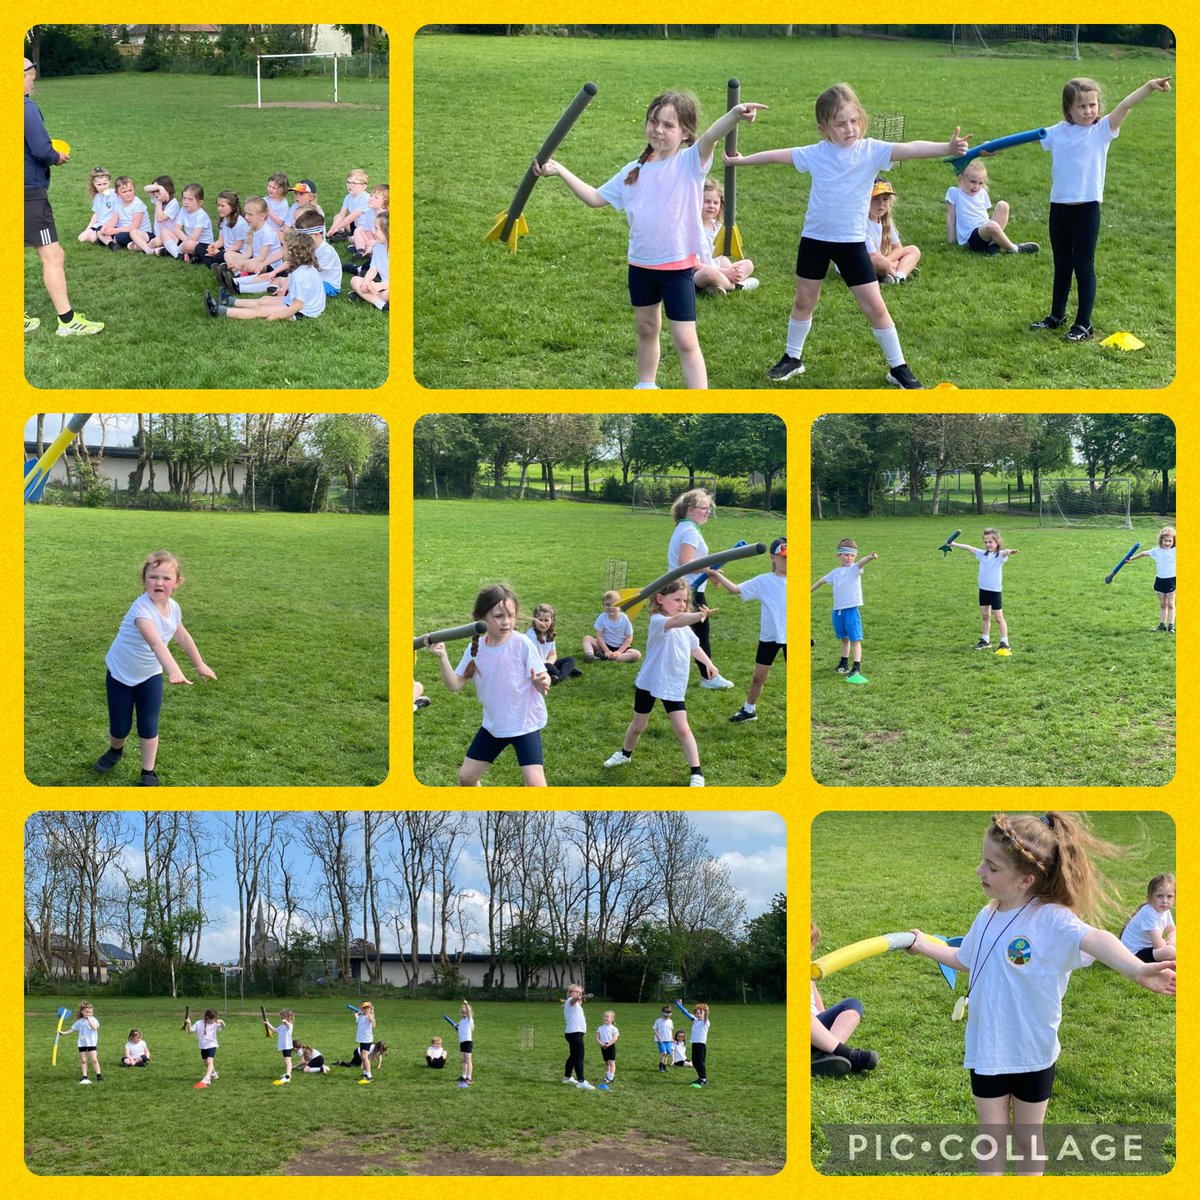 P1 enjoyed athletics in the sunshine this afternoon.